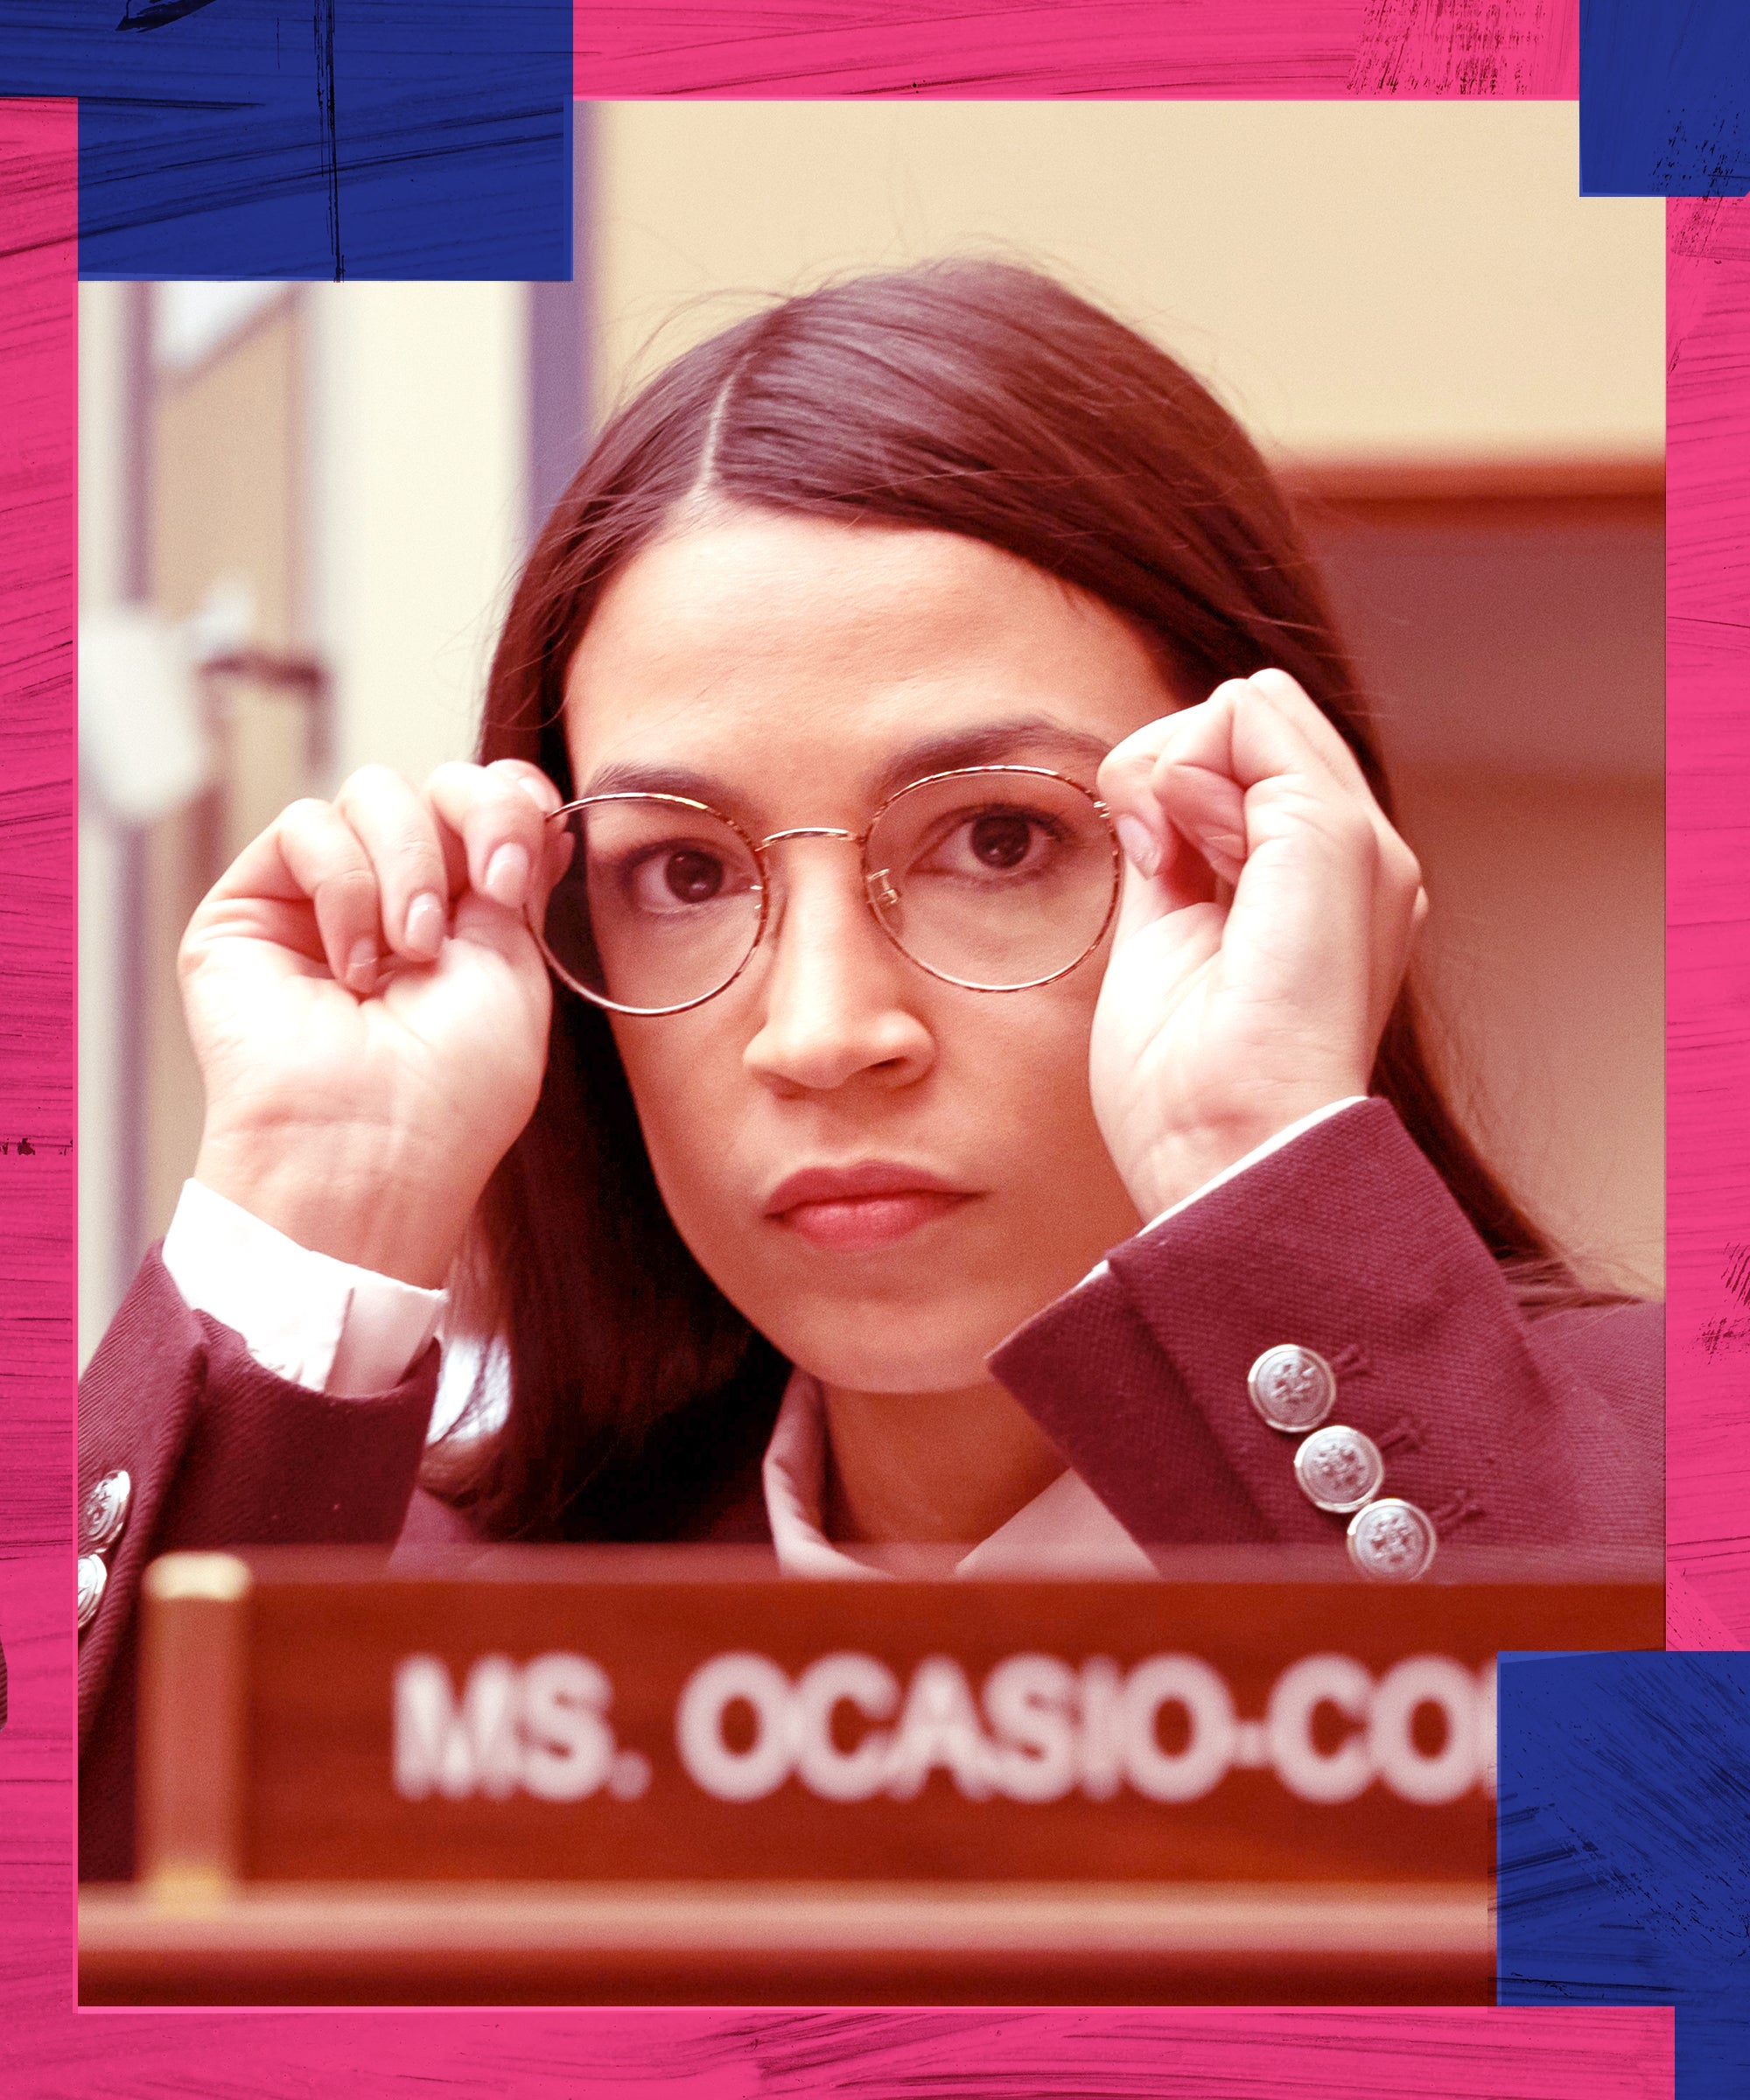 AOC just proved Twitter has changed its rules